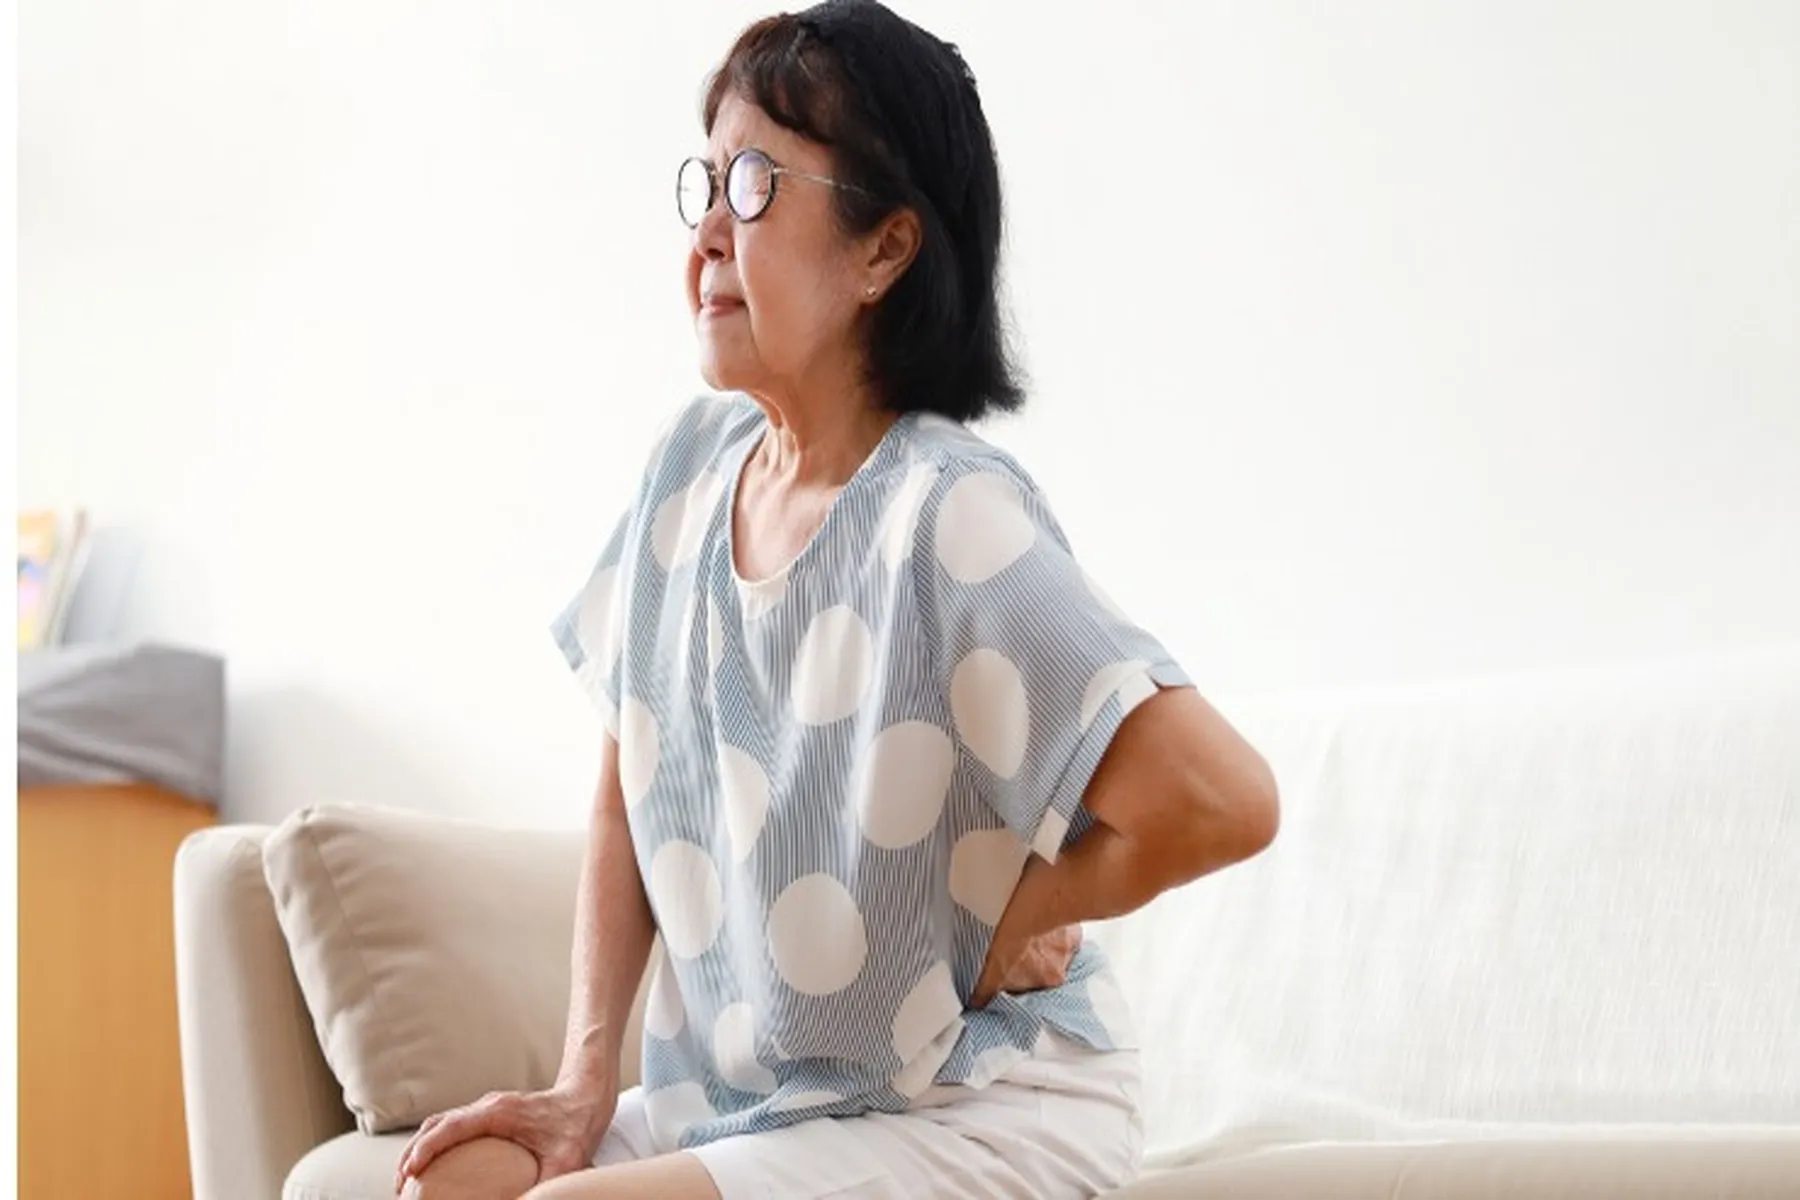 Older woman sitting on couch holding her joints and grimacing.